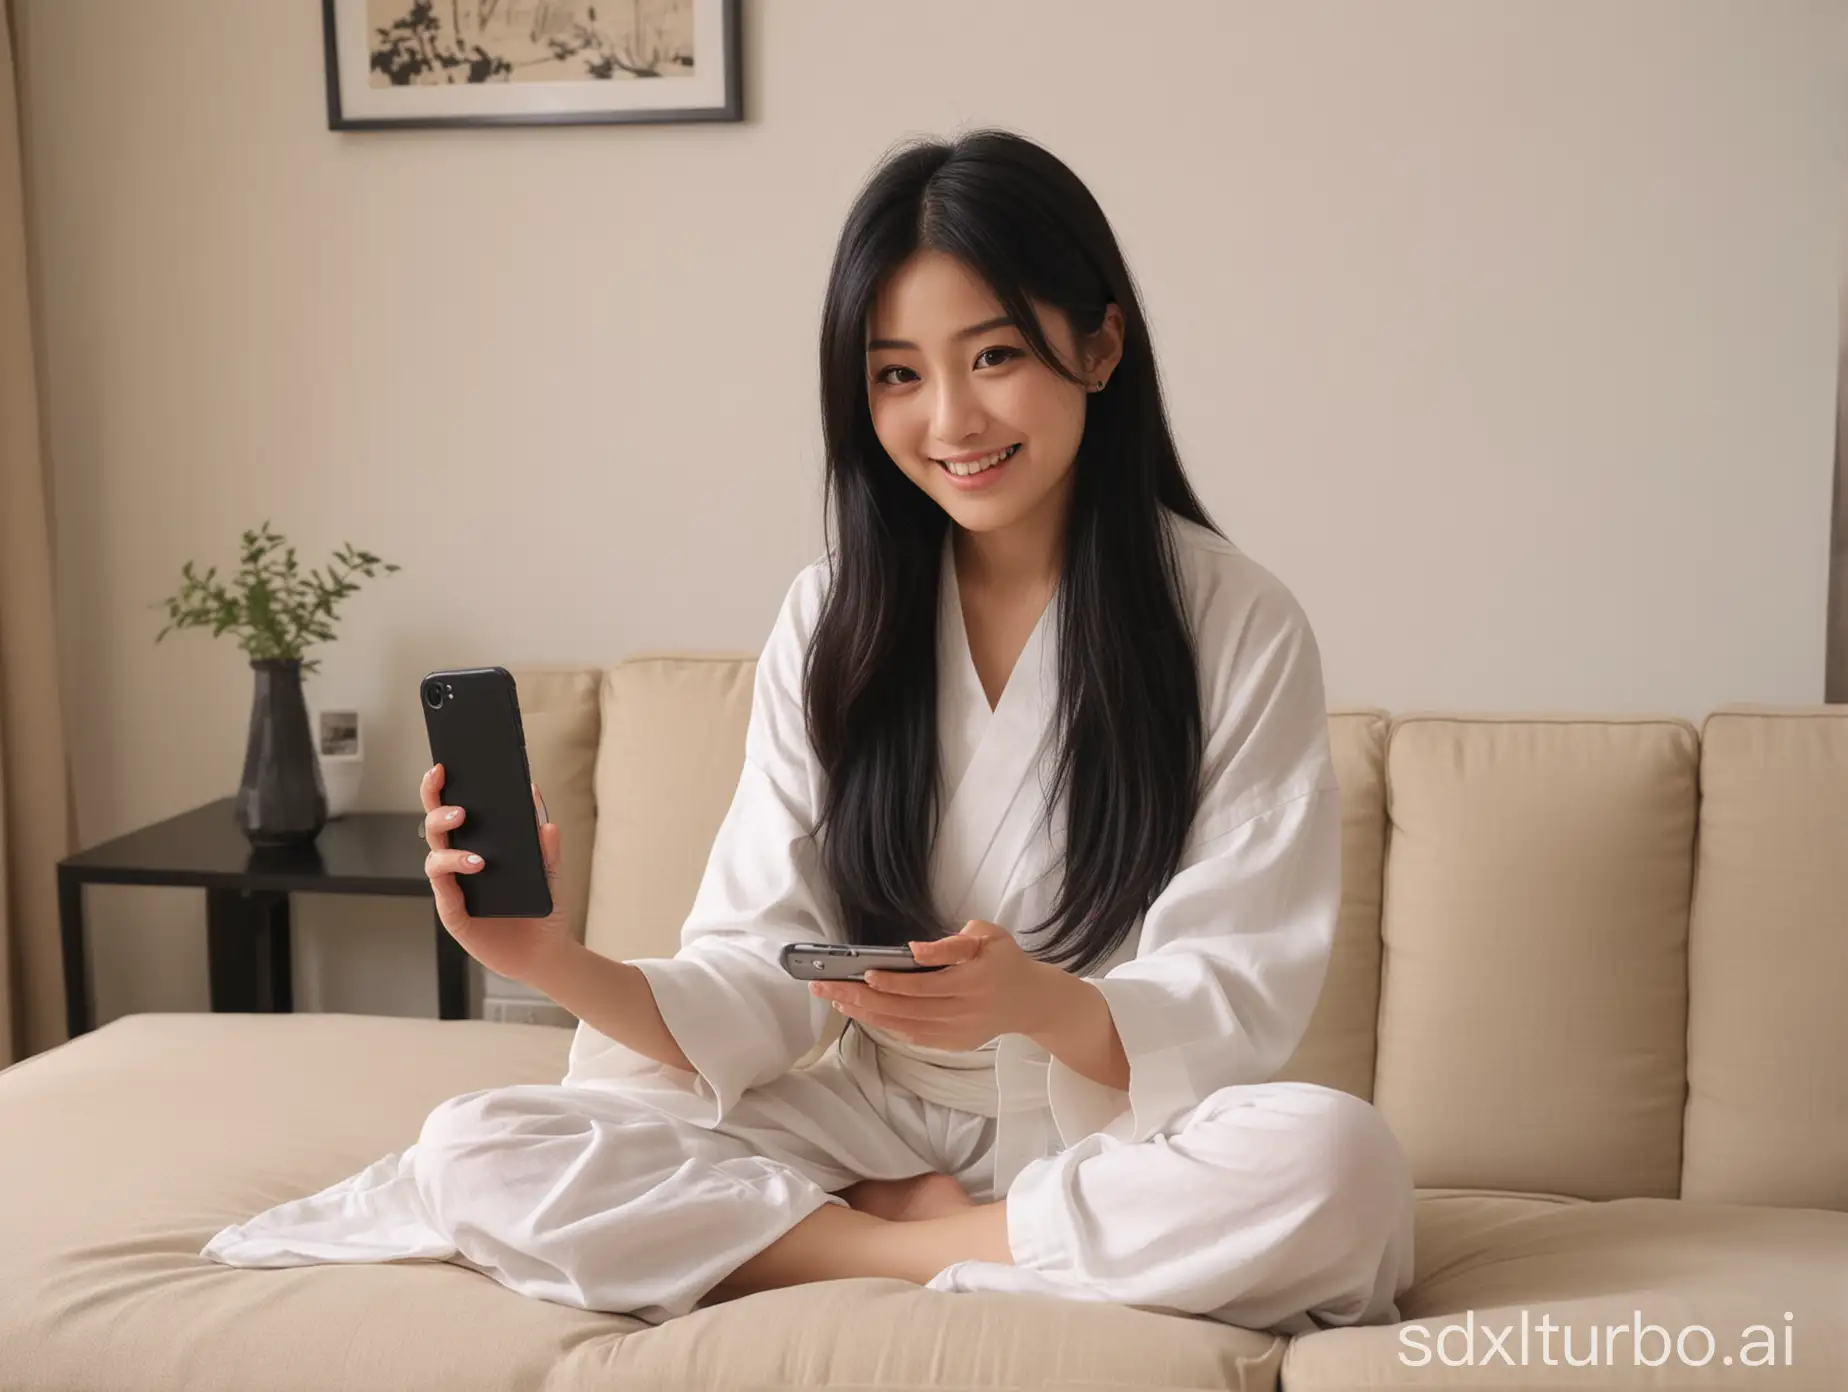 Elegant-Japanese-Woman-Engaged-with-iPhone-in-Stylish-Living-Room